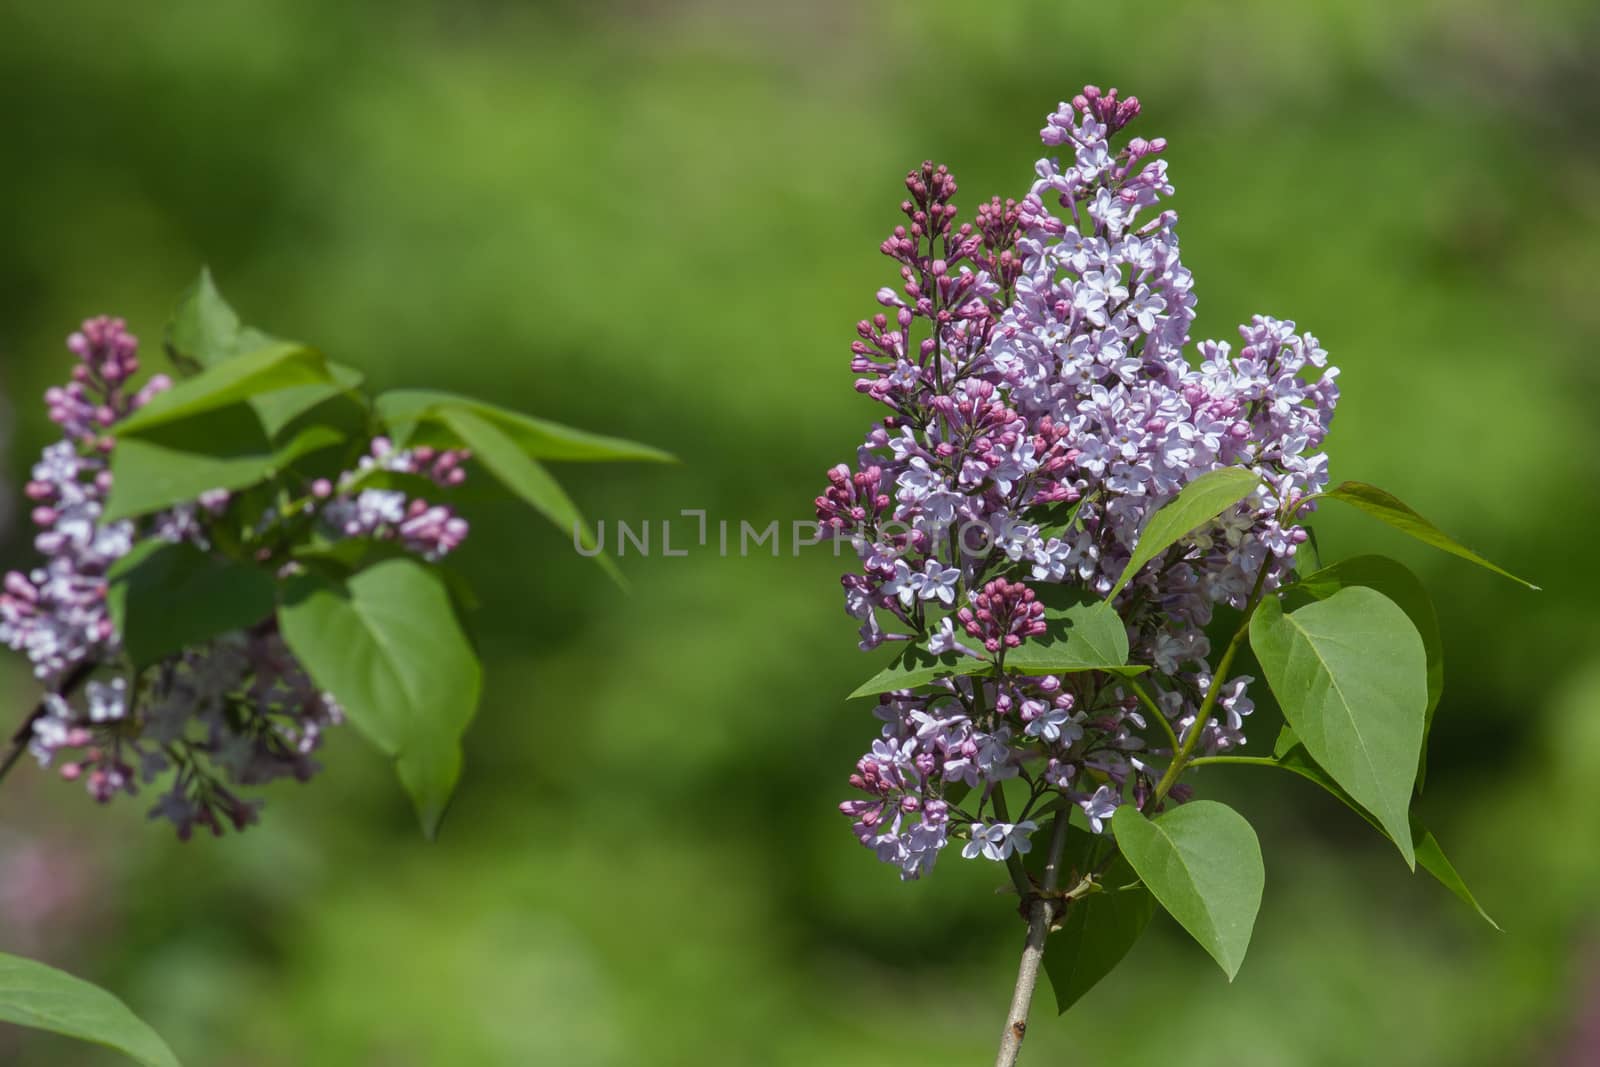 blooming lilacs on blurred green background